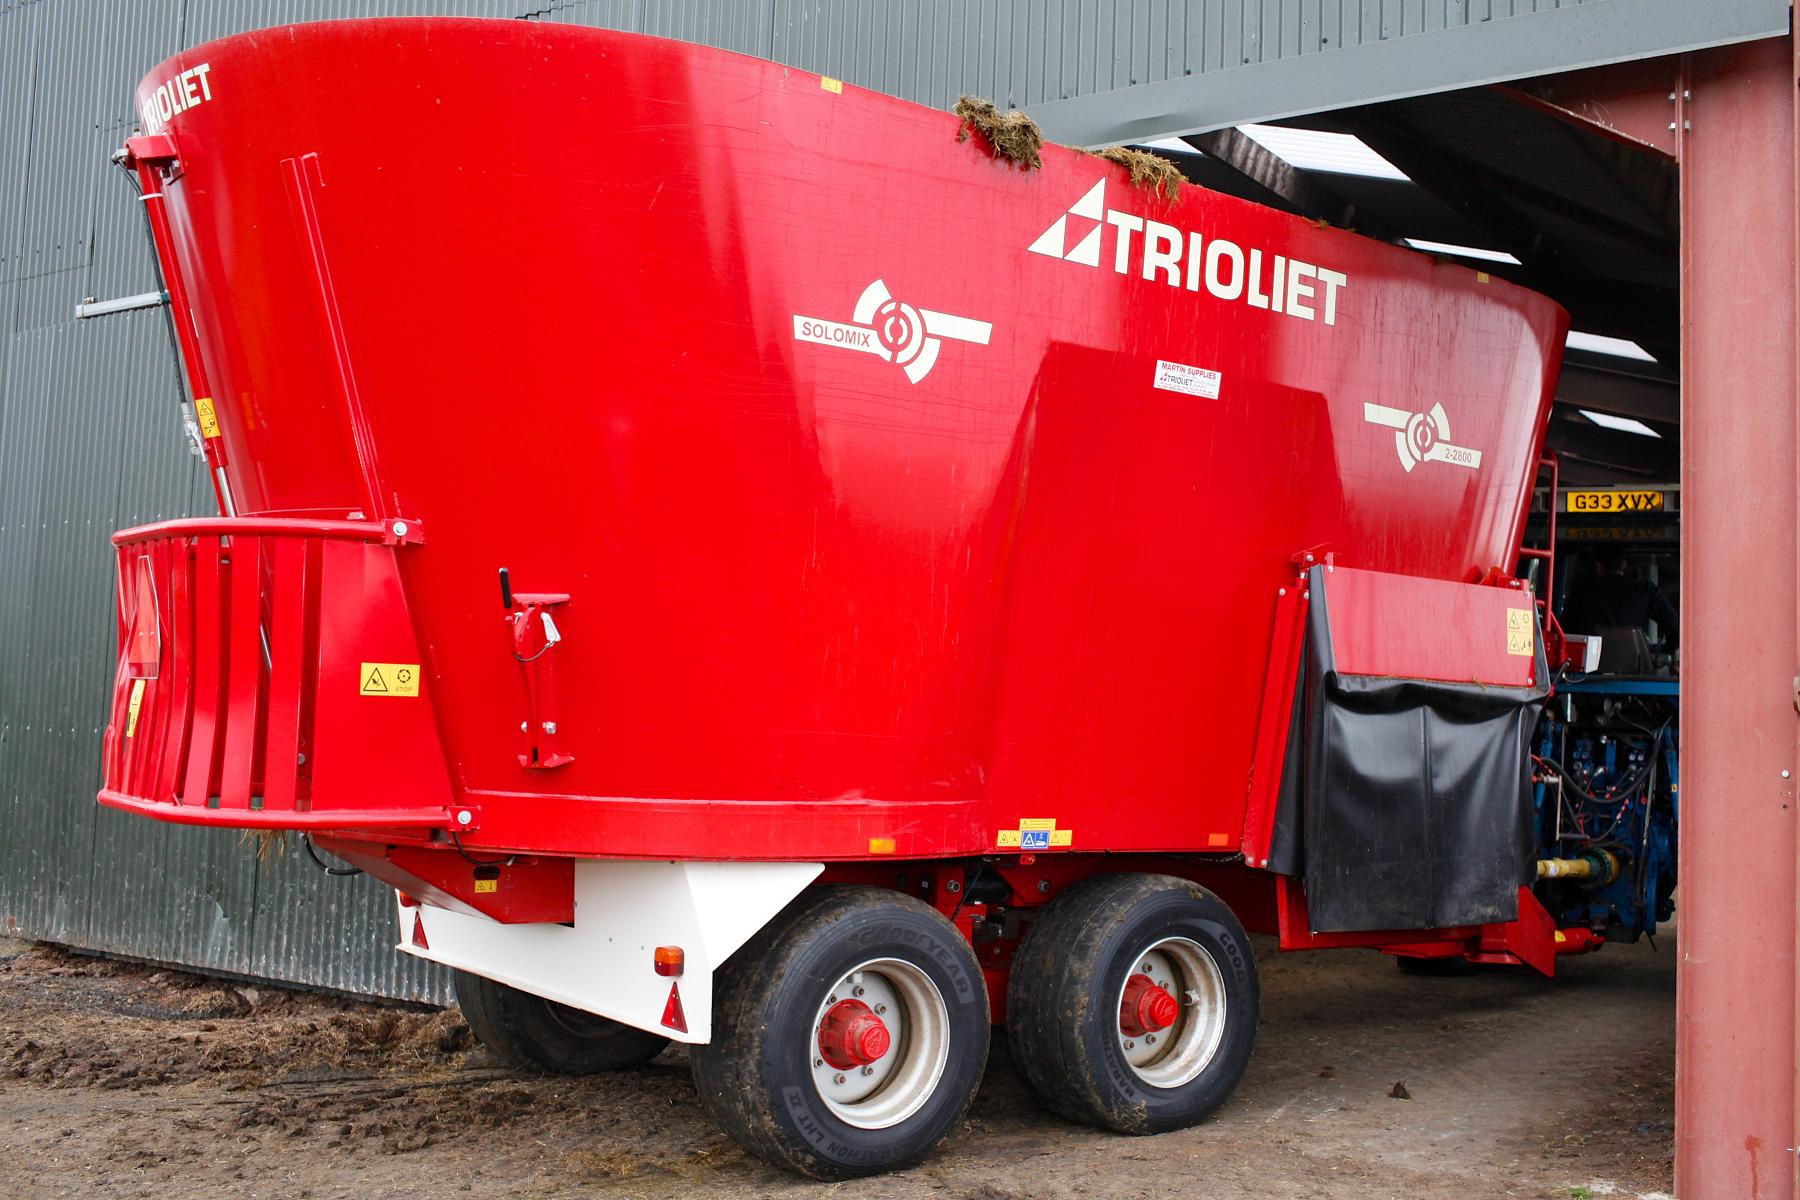 These-twin-auger-mixer-feeders-are-the-best-for-dairy-farmers